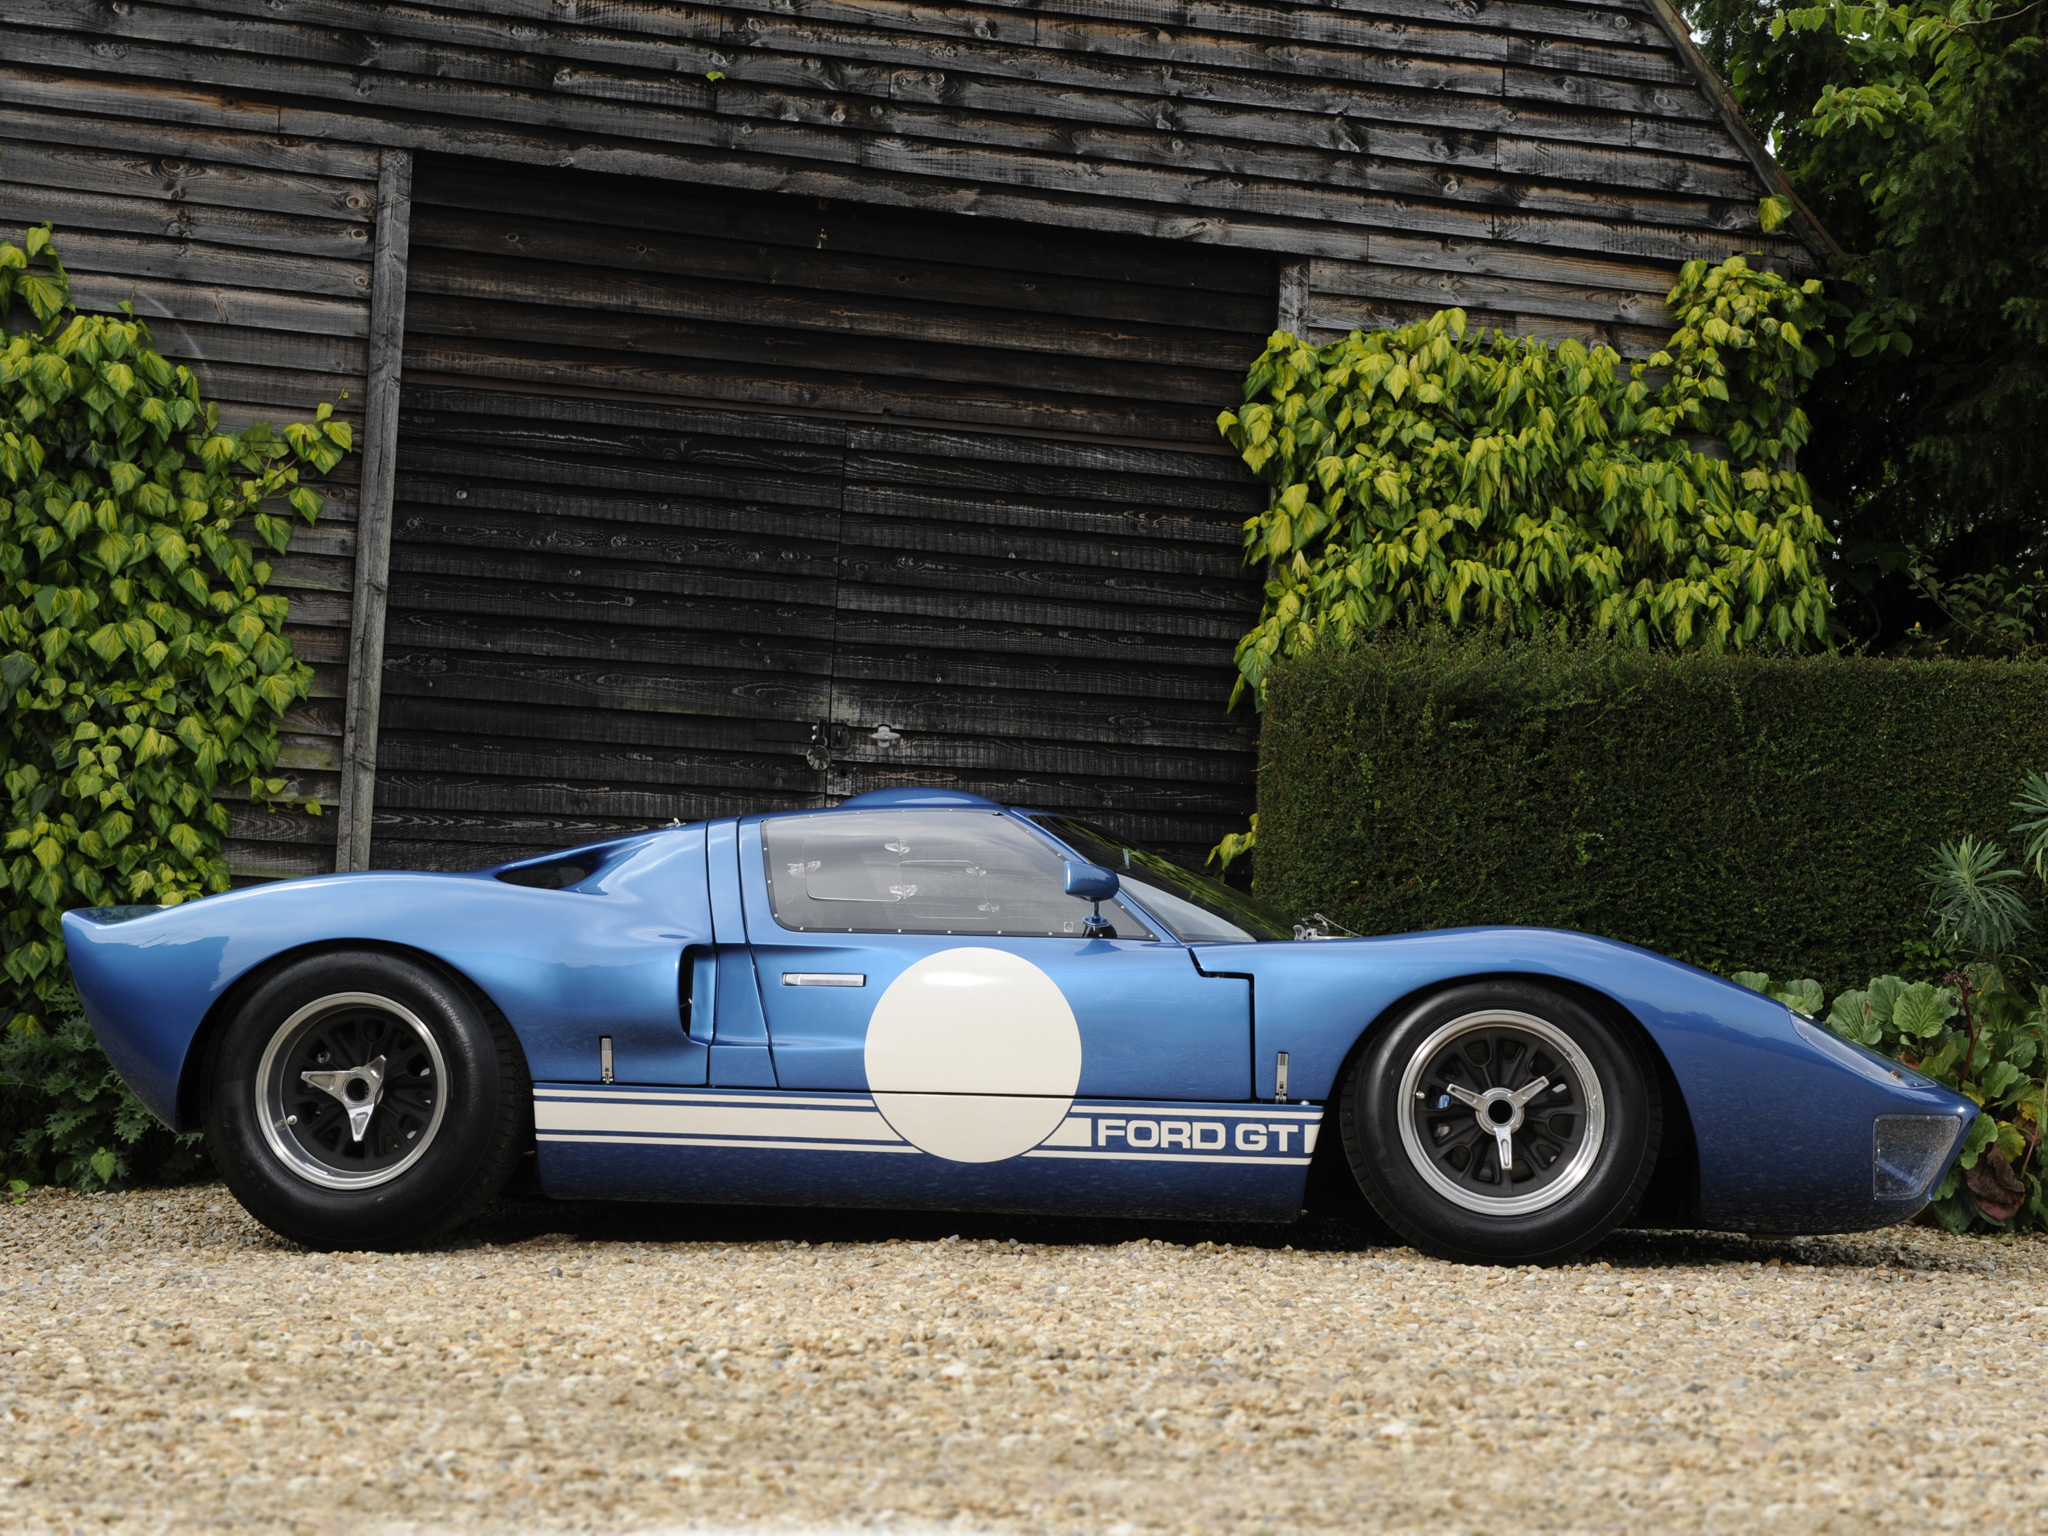 1965, Ford, Gt40, Mkii, Supercar, Race, Racing, Classic, G t Wallpaper